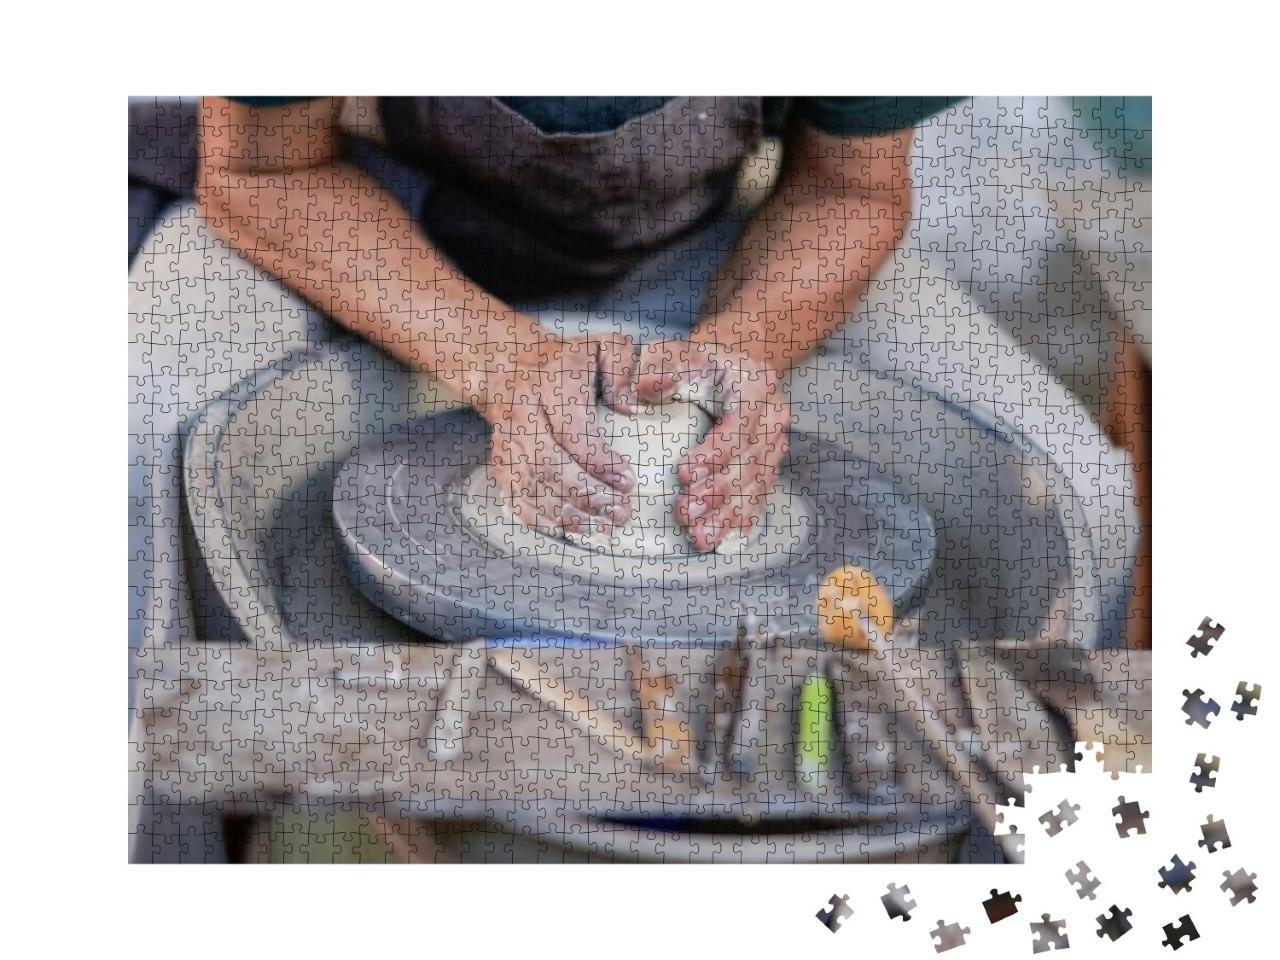 Craftsman Artist Making Craft, Pottery, Sculptor F... Jigsaw Puzzle with 1000 pieces